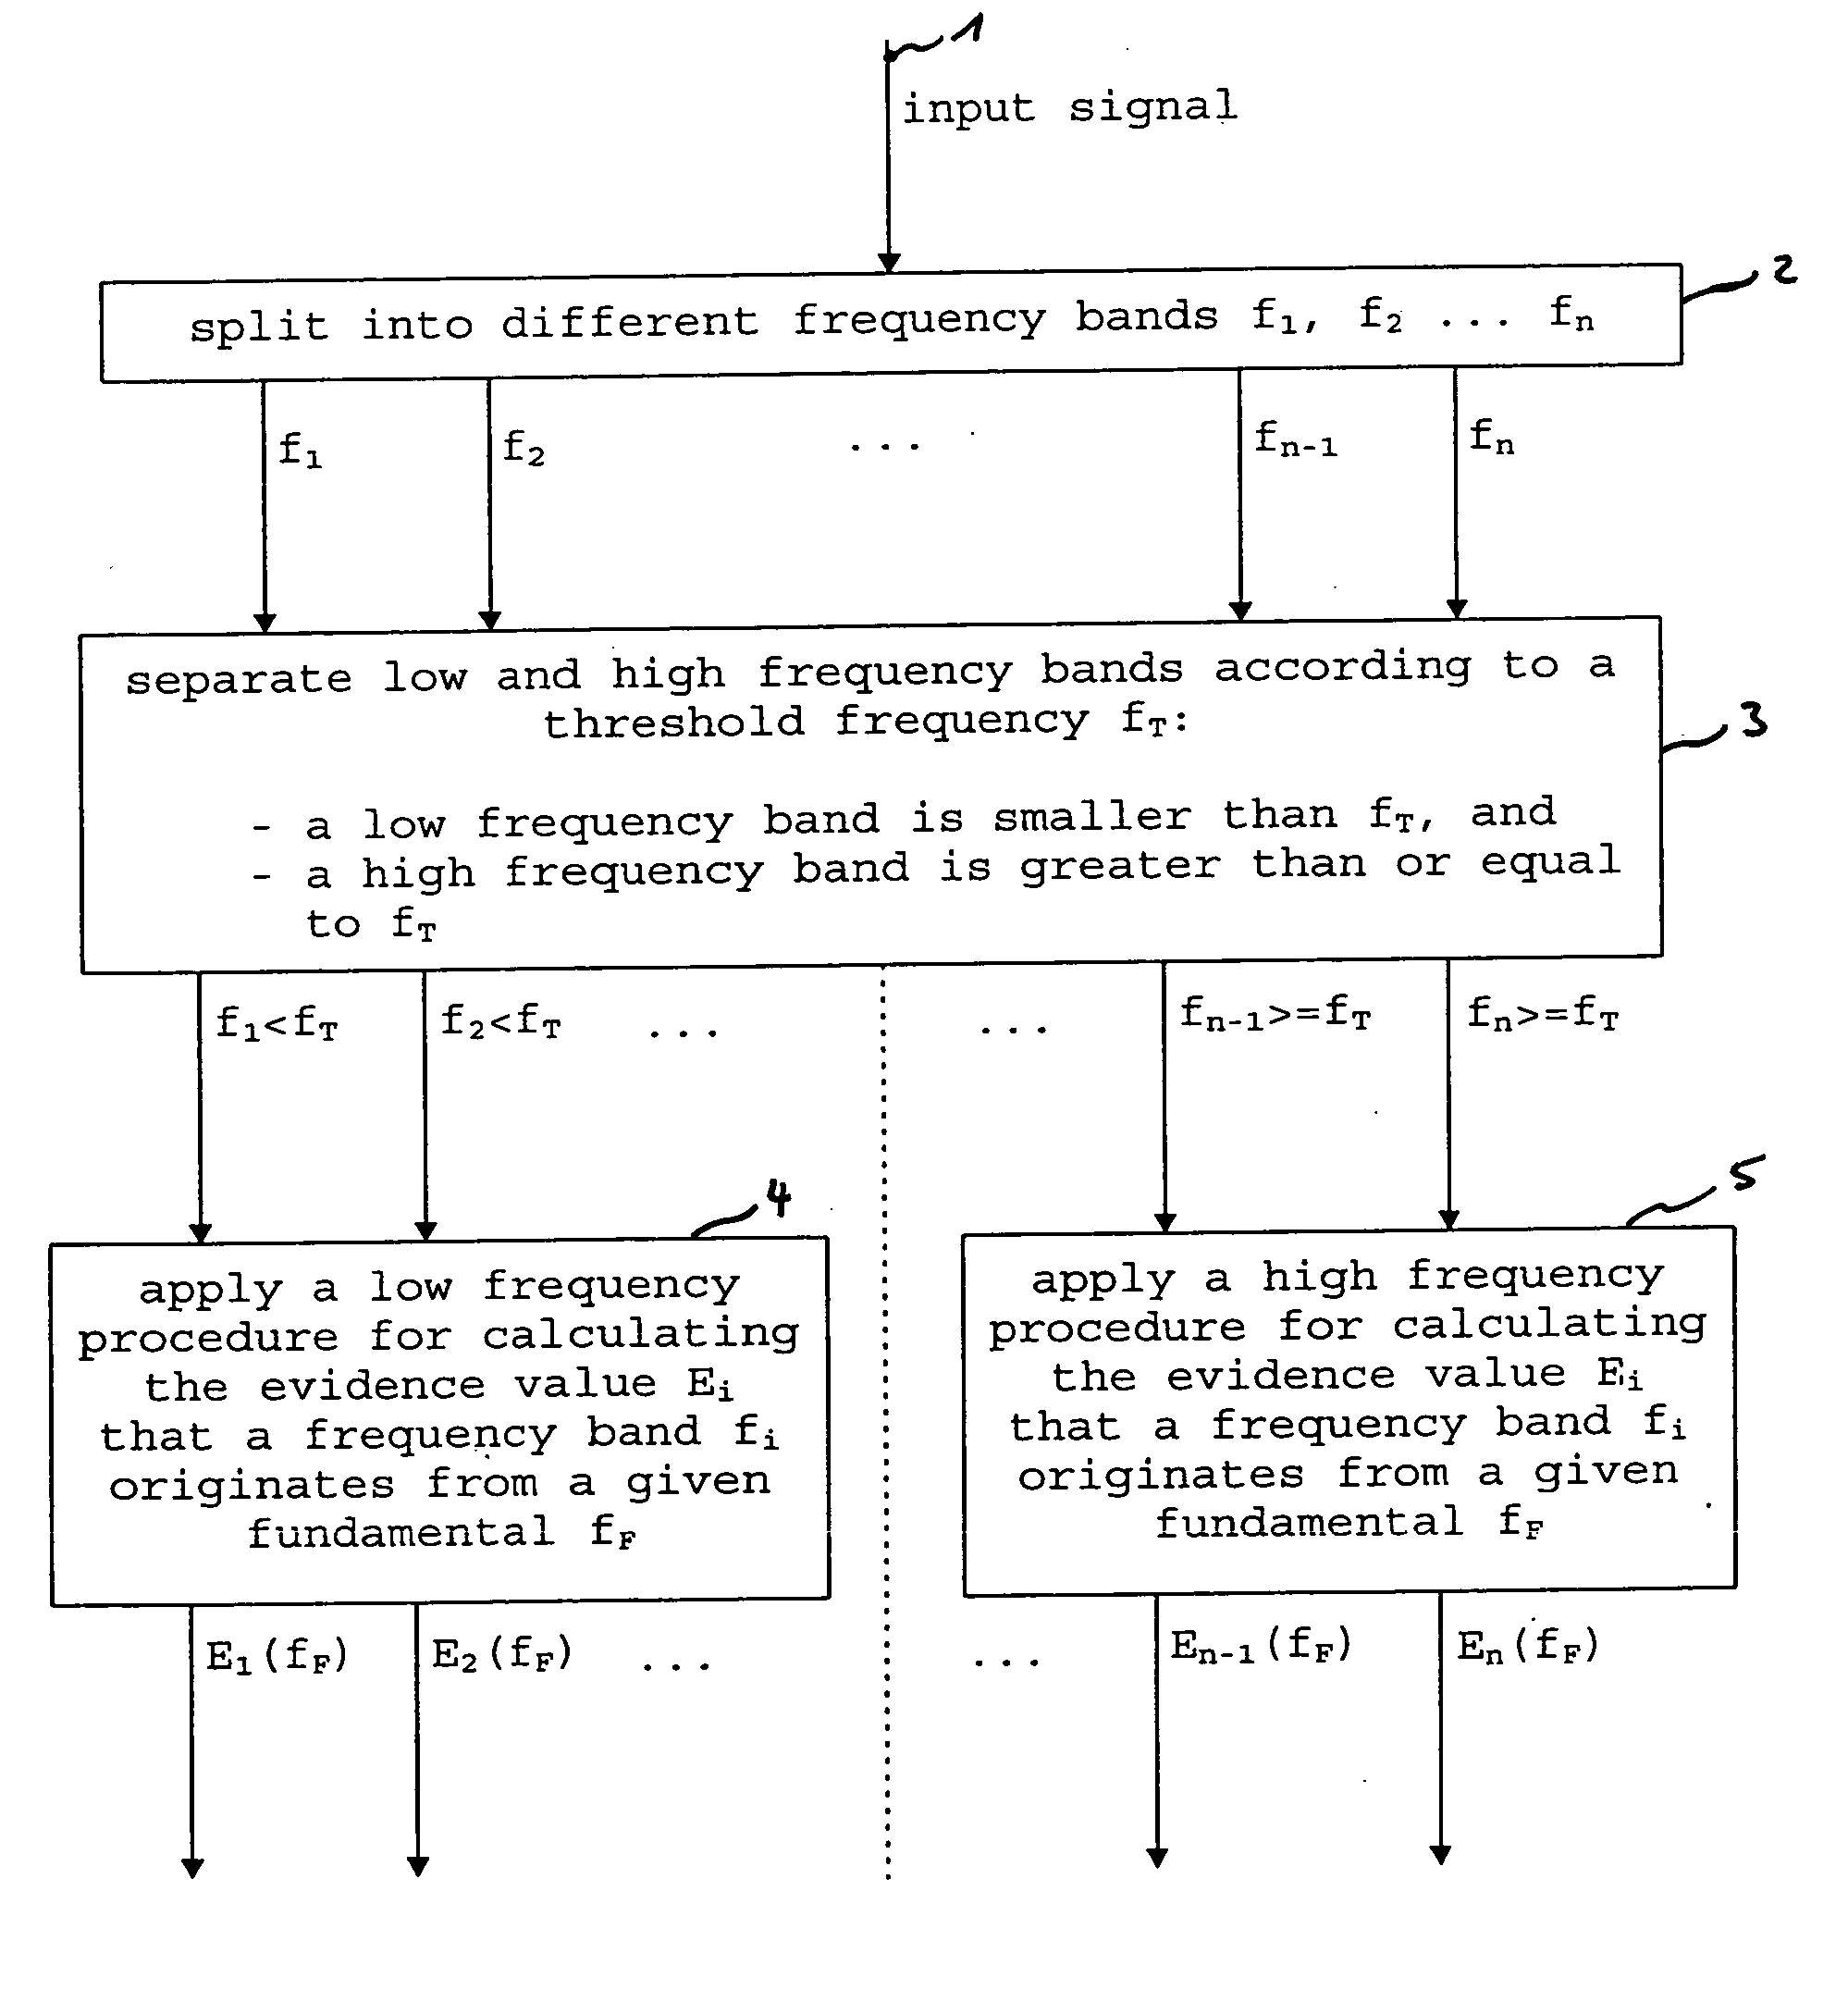 Unified treatment of resolved and unresolved harmonics